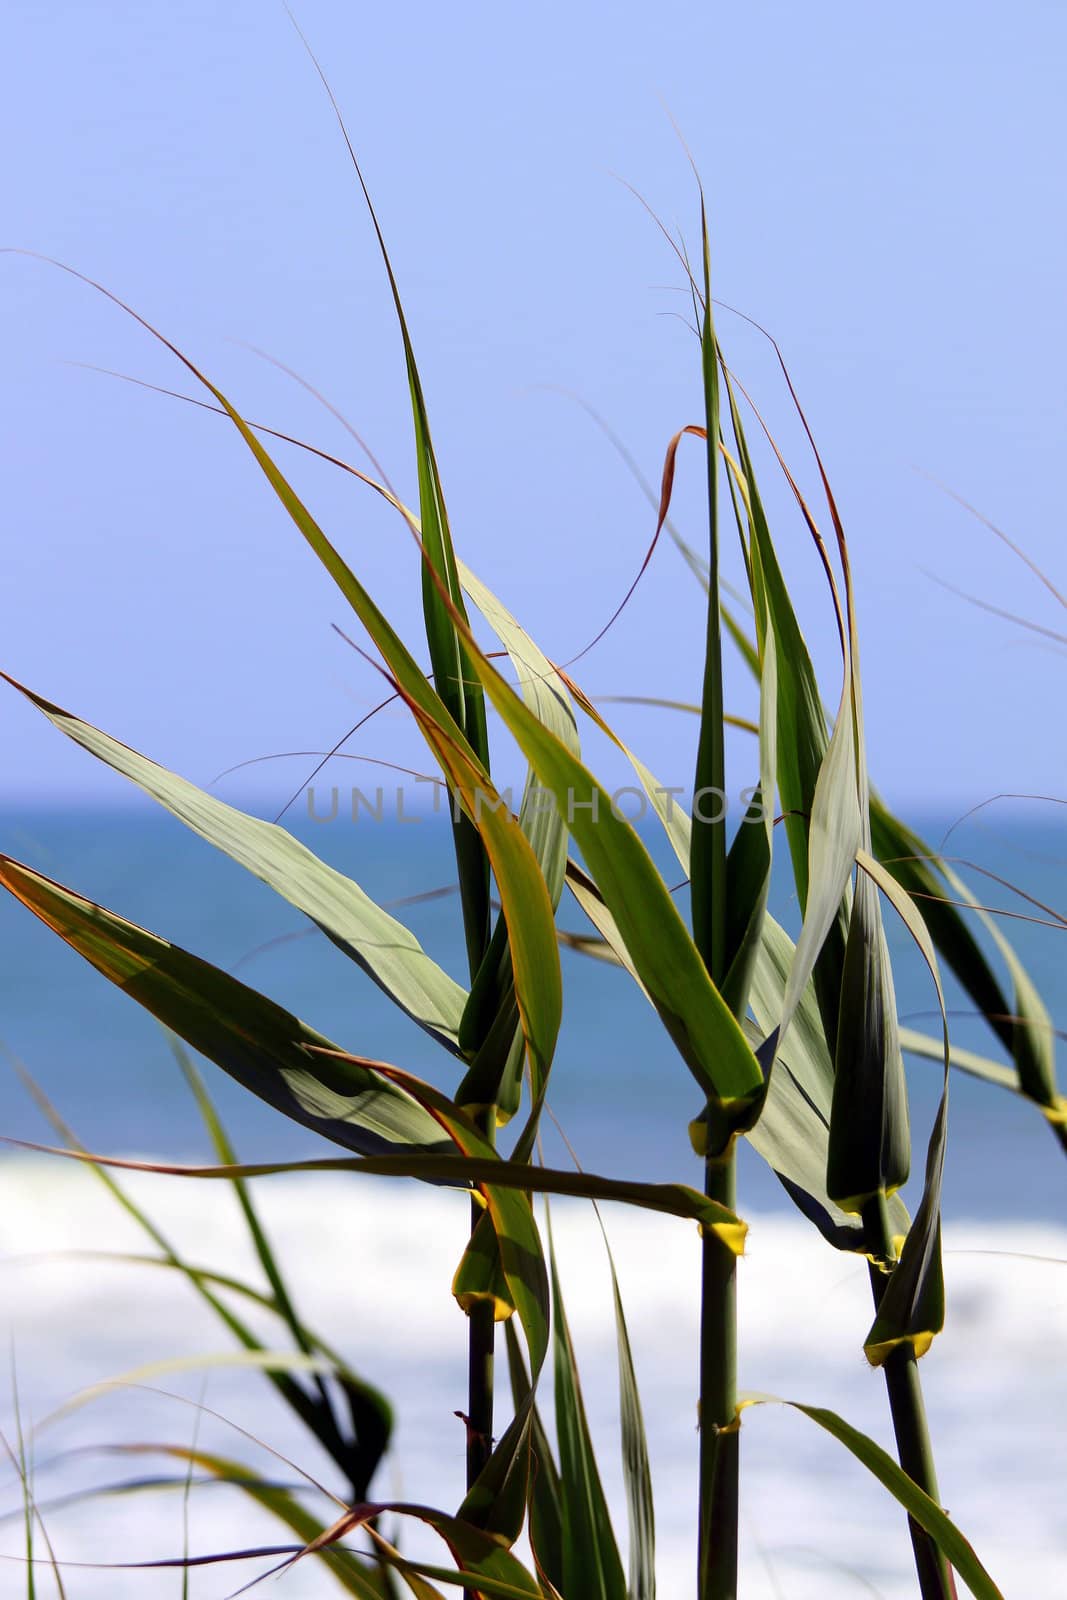 Green reeds with the beach and ocean in the background.